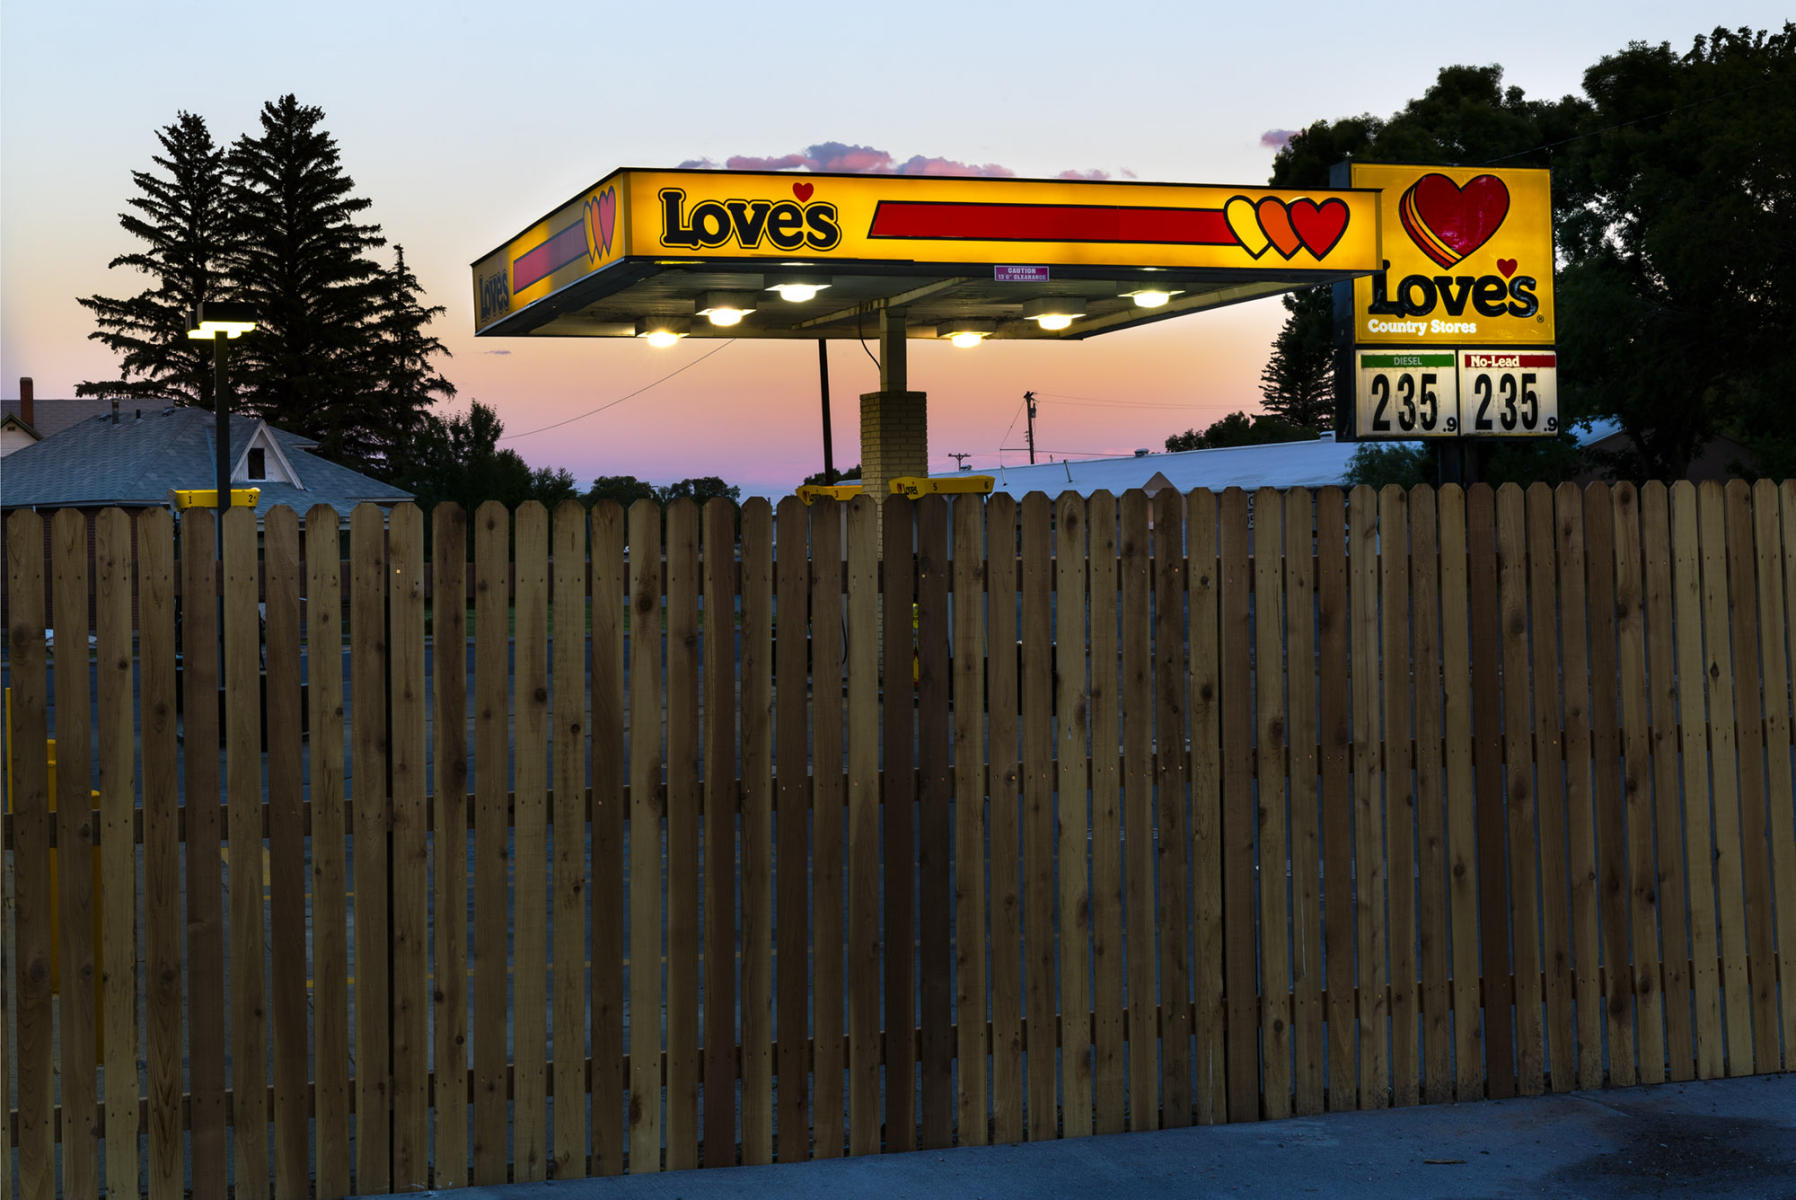 View of Love's gas station from the parking lot of the hotel in Monte Vista, CO. : Visiting Mom : New York City portrait photographer